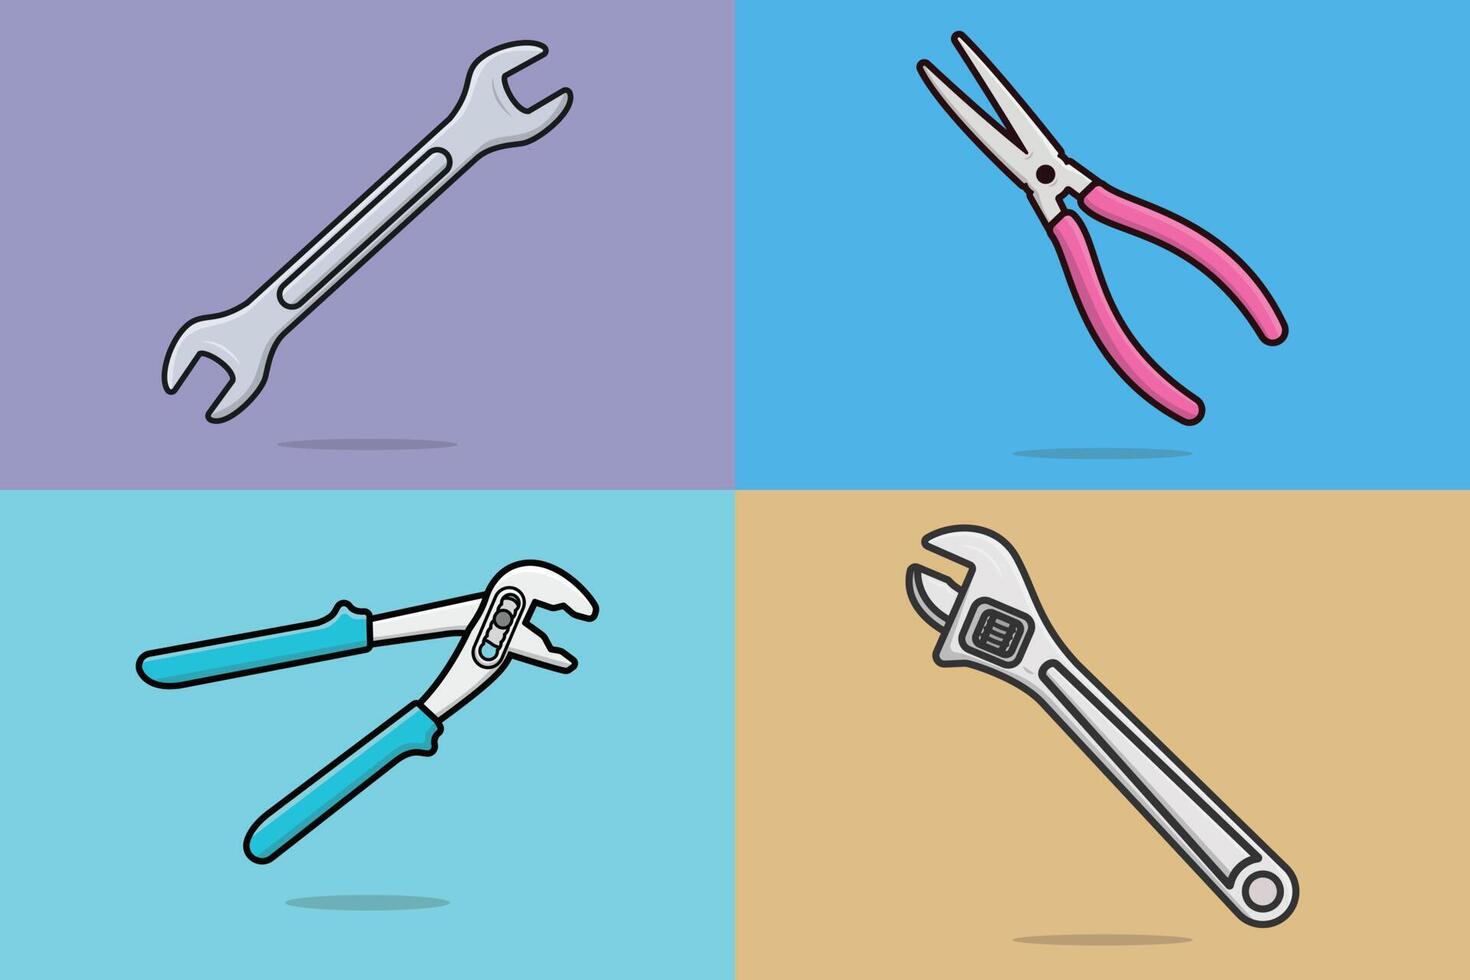 Cutting Pliers, Adjustable Water Pump Pliers, Wrench and Adjustable Wrench Working tools vector illustration. Collection of Construction and Mechanic working elements, car repairing service icons.